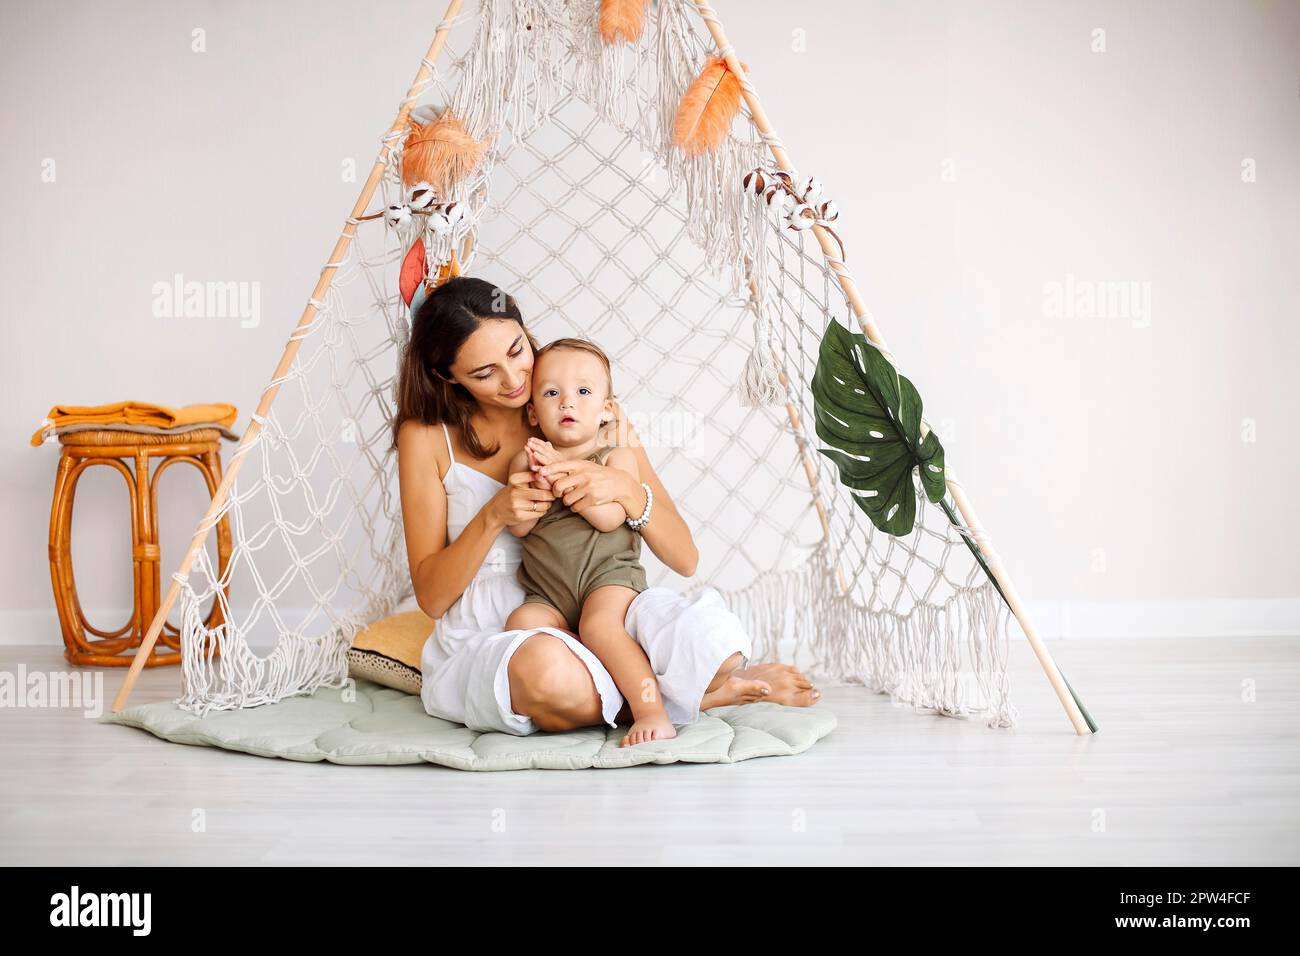 Young happy family loving mother with baby kid sitting together in wigwam teepee at home, mom playing with toddler in play tent, horizontal shot. Stock Photo